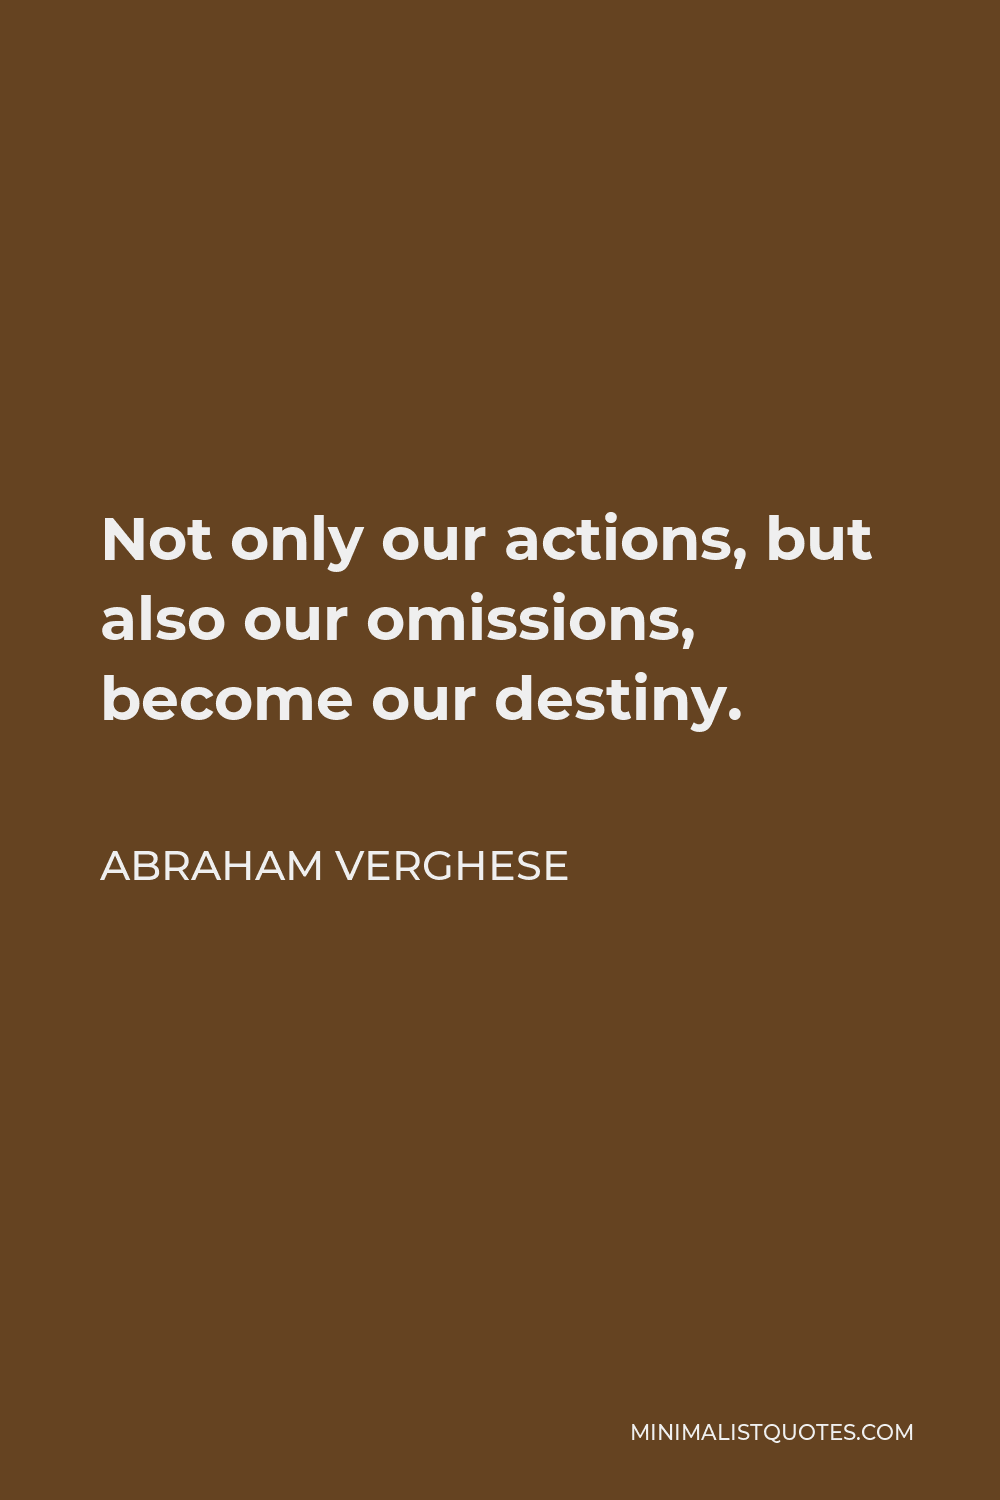 Abraham Verghese Quote - Not only our actions, but also our omissions, become our destiny.